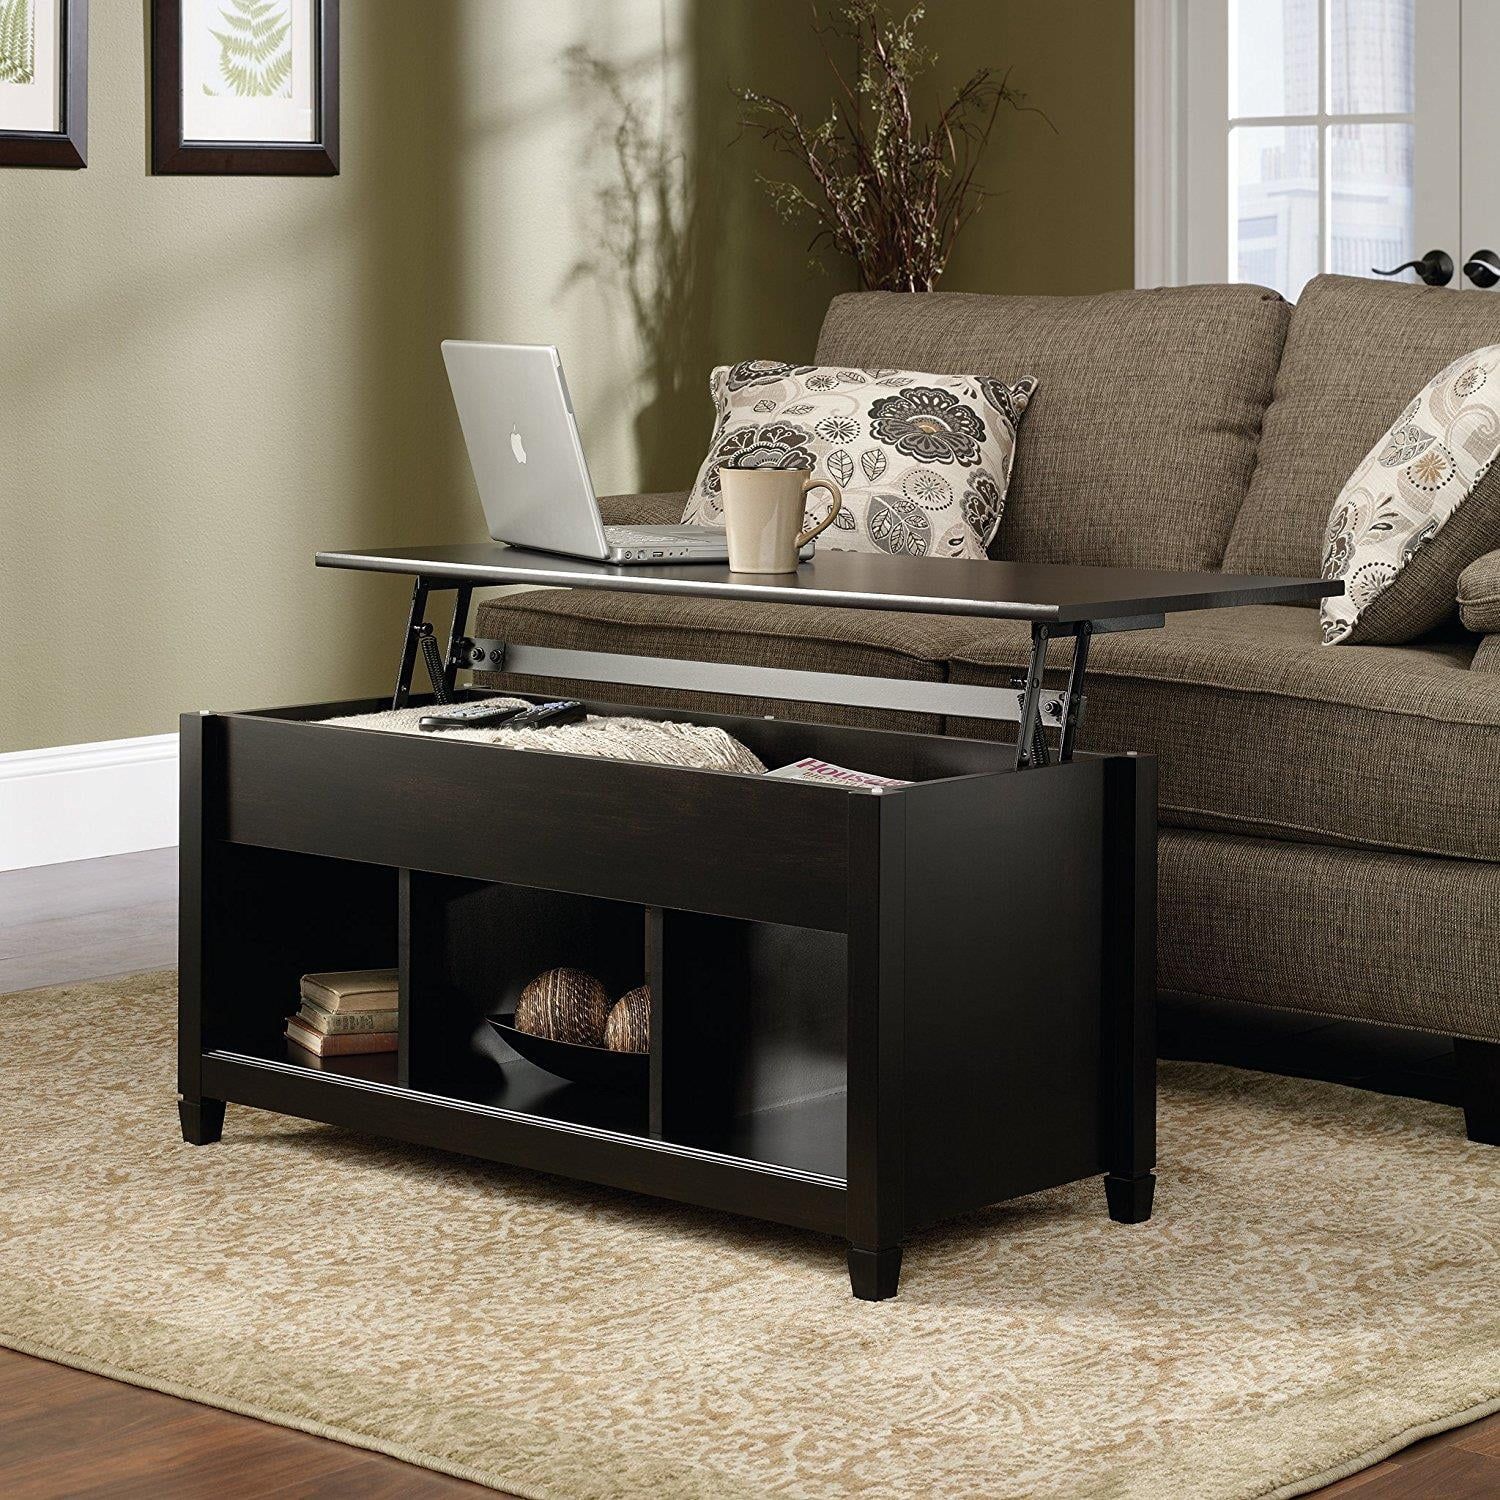 Ktaxon Coffee Table, Lift Top Coffee Table W/Hidden Storage Compartment &  Lower 3 Cube Open Shelves Lift Tabletop Coffee Table For Living  Room/Reception Room/Office Black – Walmart Throughout Coffee Tables With Hidden Compartments (View 4 of 15)